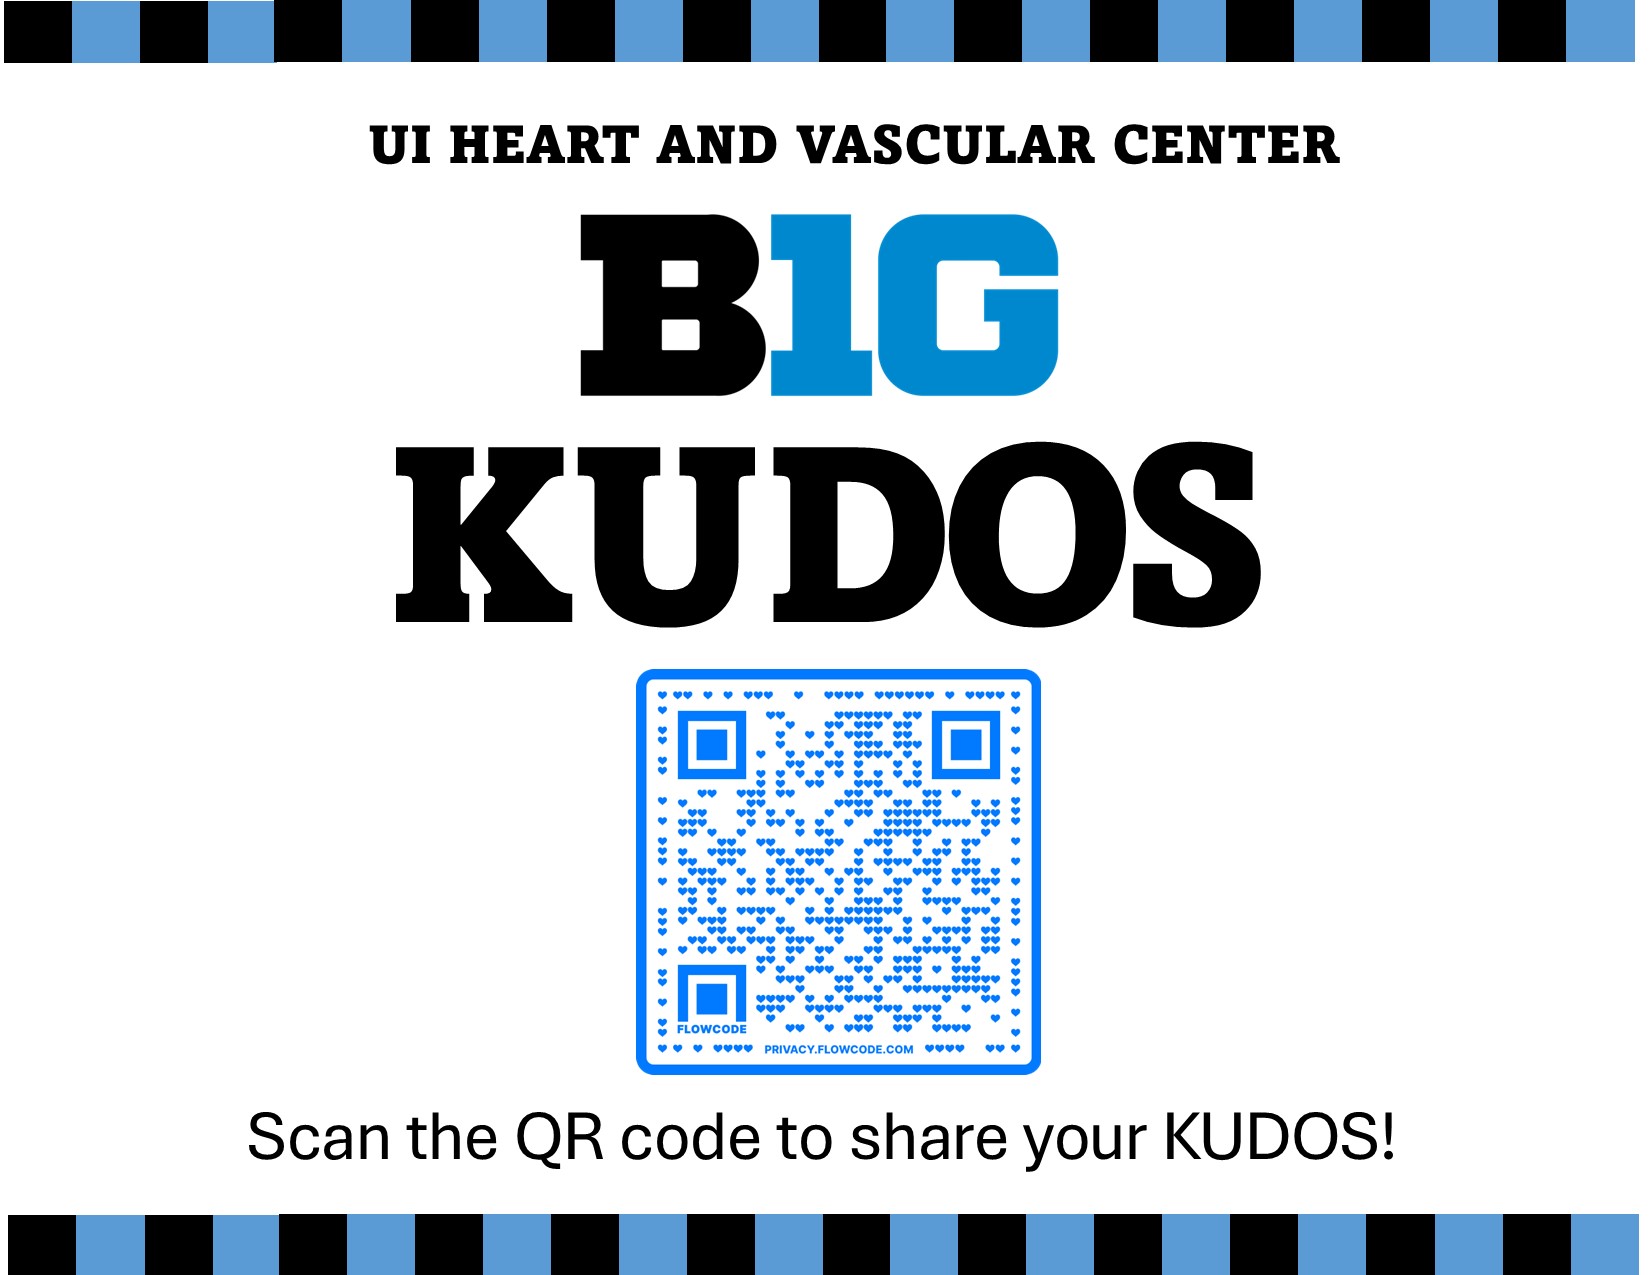 Don't forget to submit a B1G KUDOS!